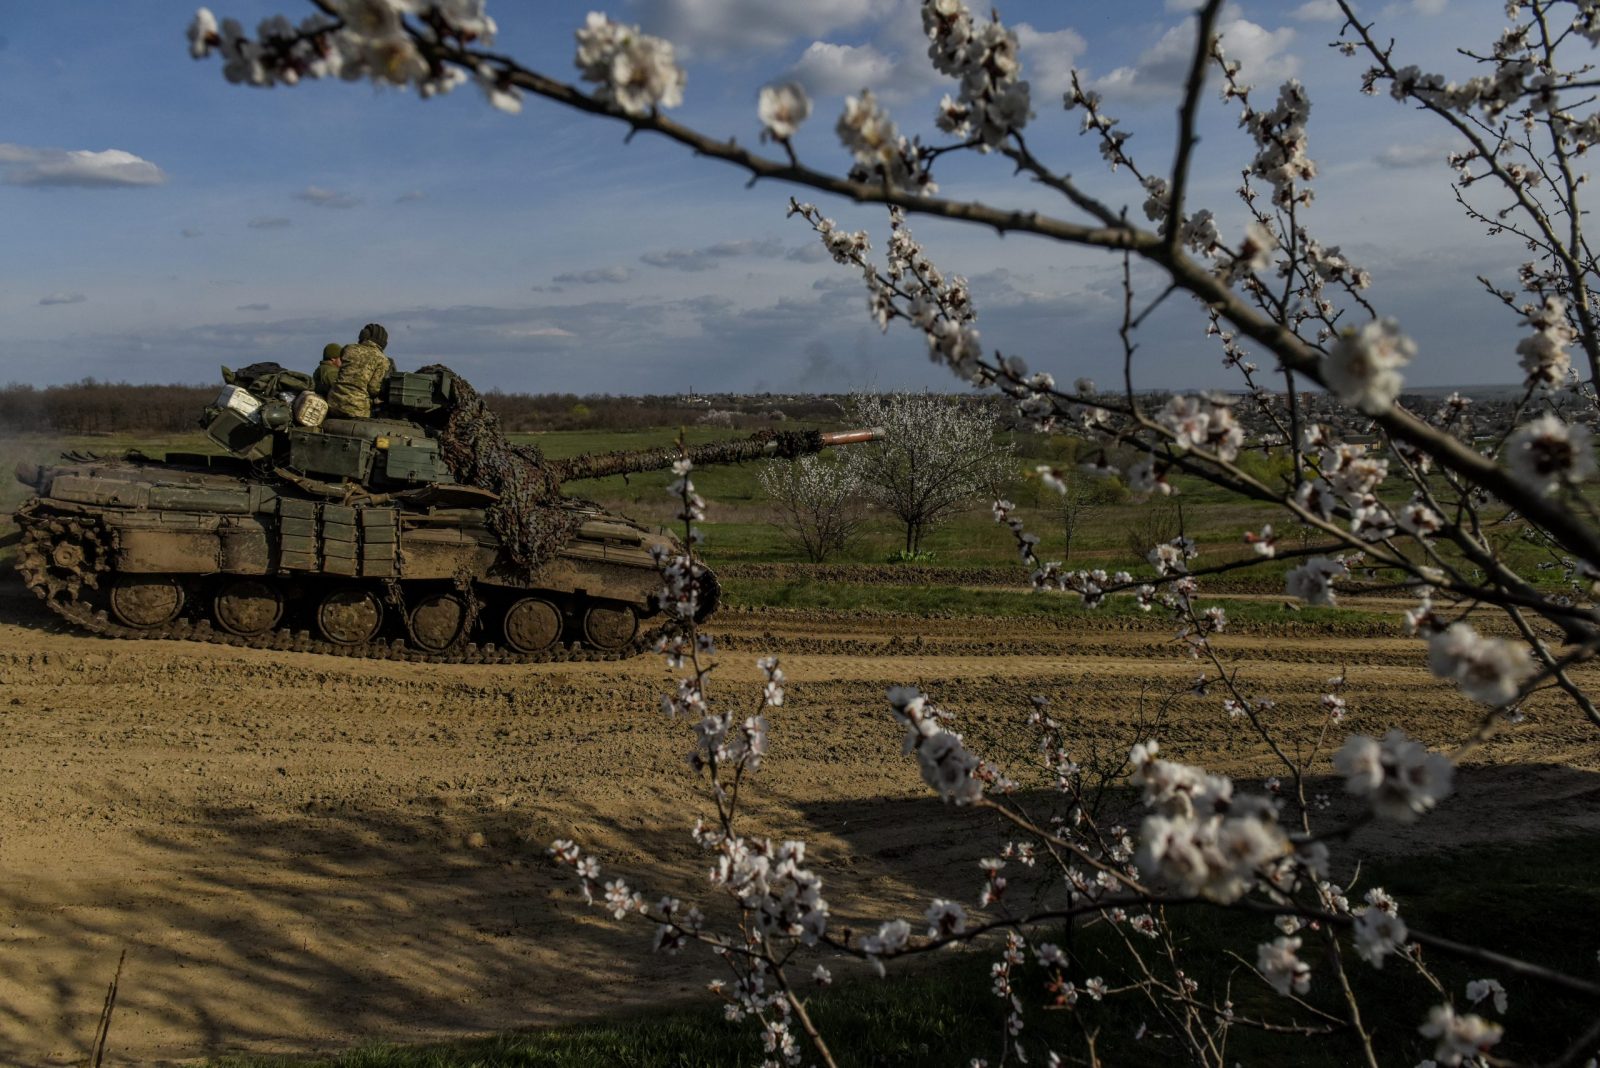 epa10567790 A tank moves on the road,  at undisclosed location near Bakhmut,  Donetsk region, Ukraine, 10 April 2023. Russian troops entered Ukrainian territory on 24 February 2022, starting a conflict that has provoked destruction and a humanitarian crisis.  EPA/OLEG PETRASYUK